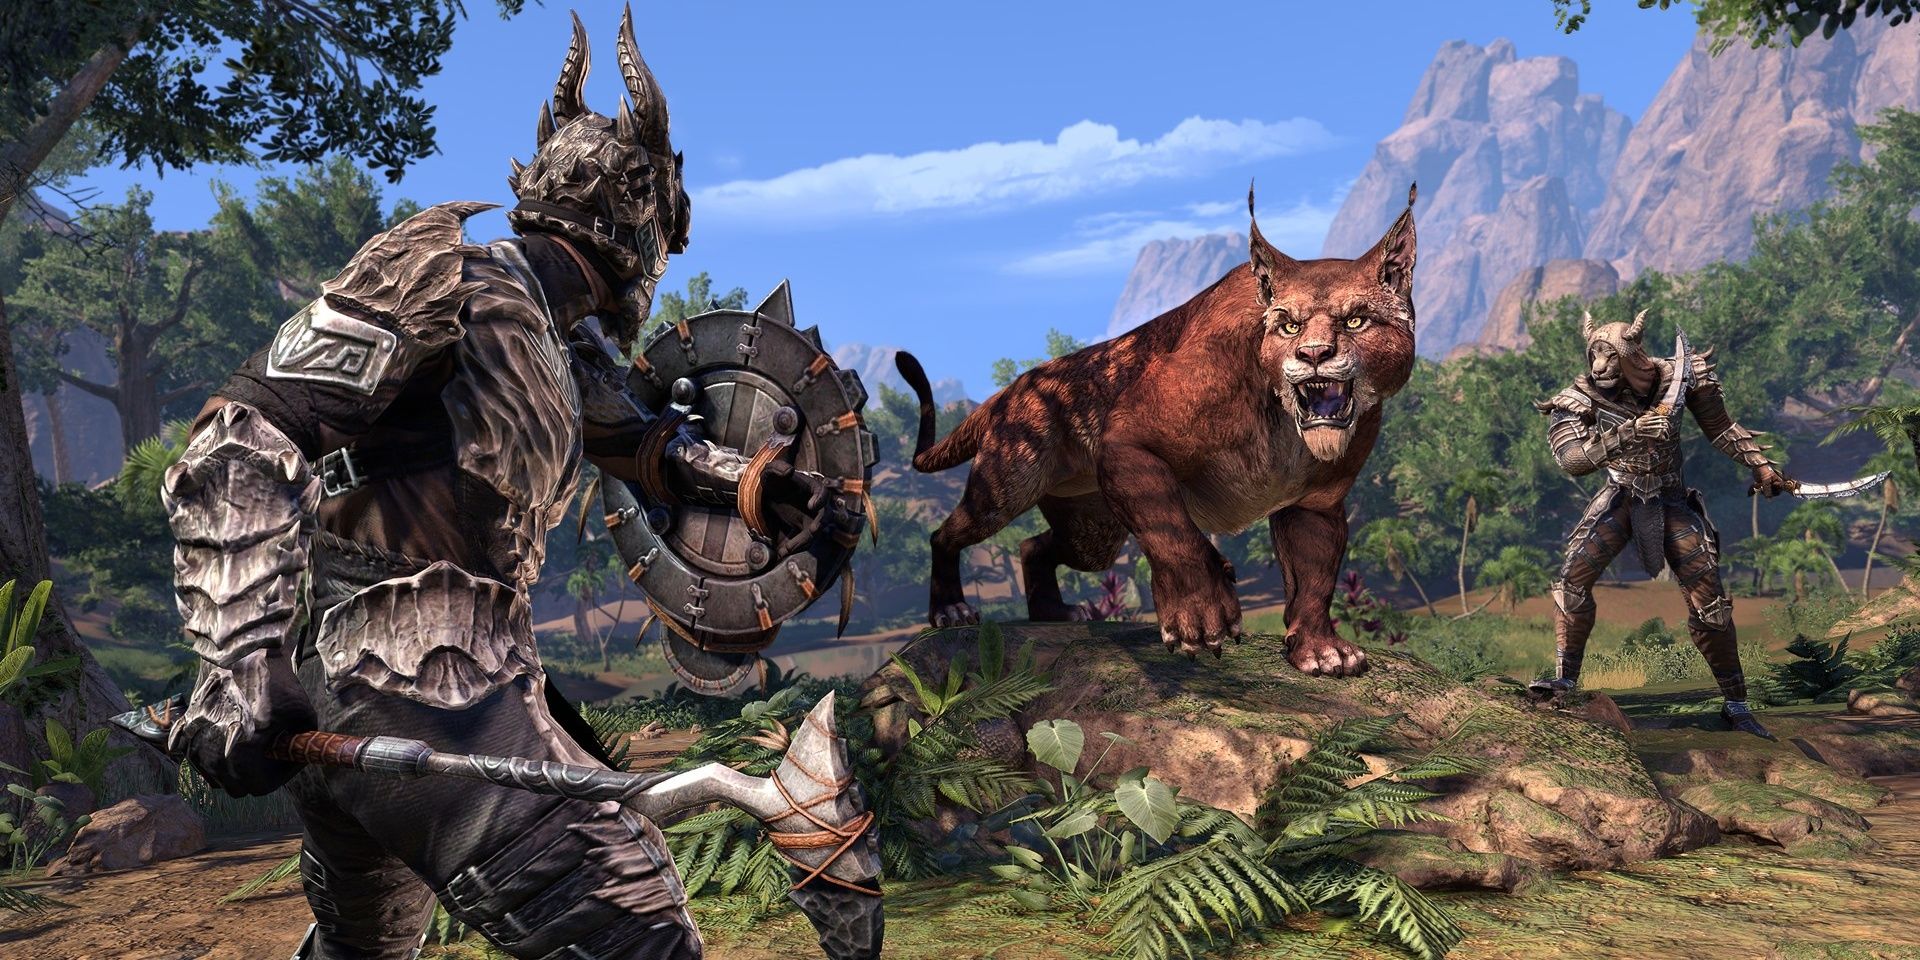 Elder Scrolls character fighting a large cat-like creature. 